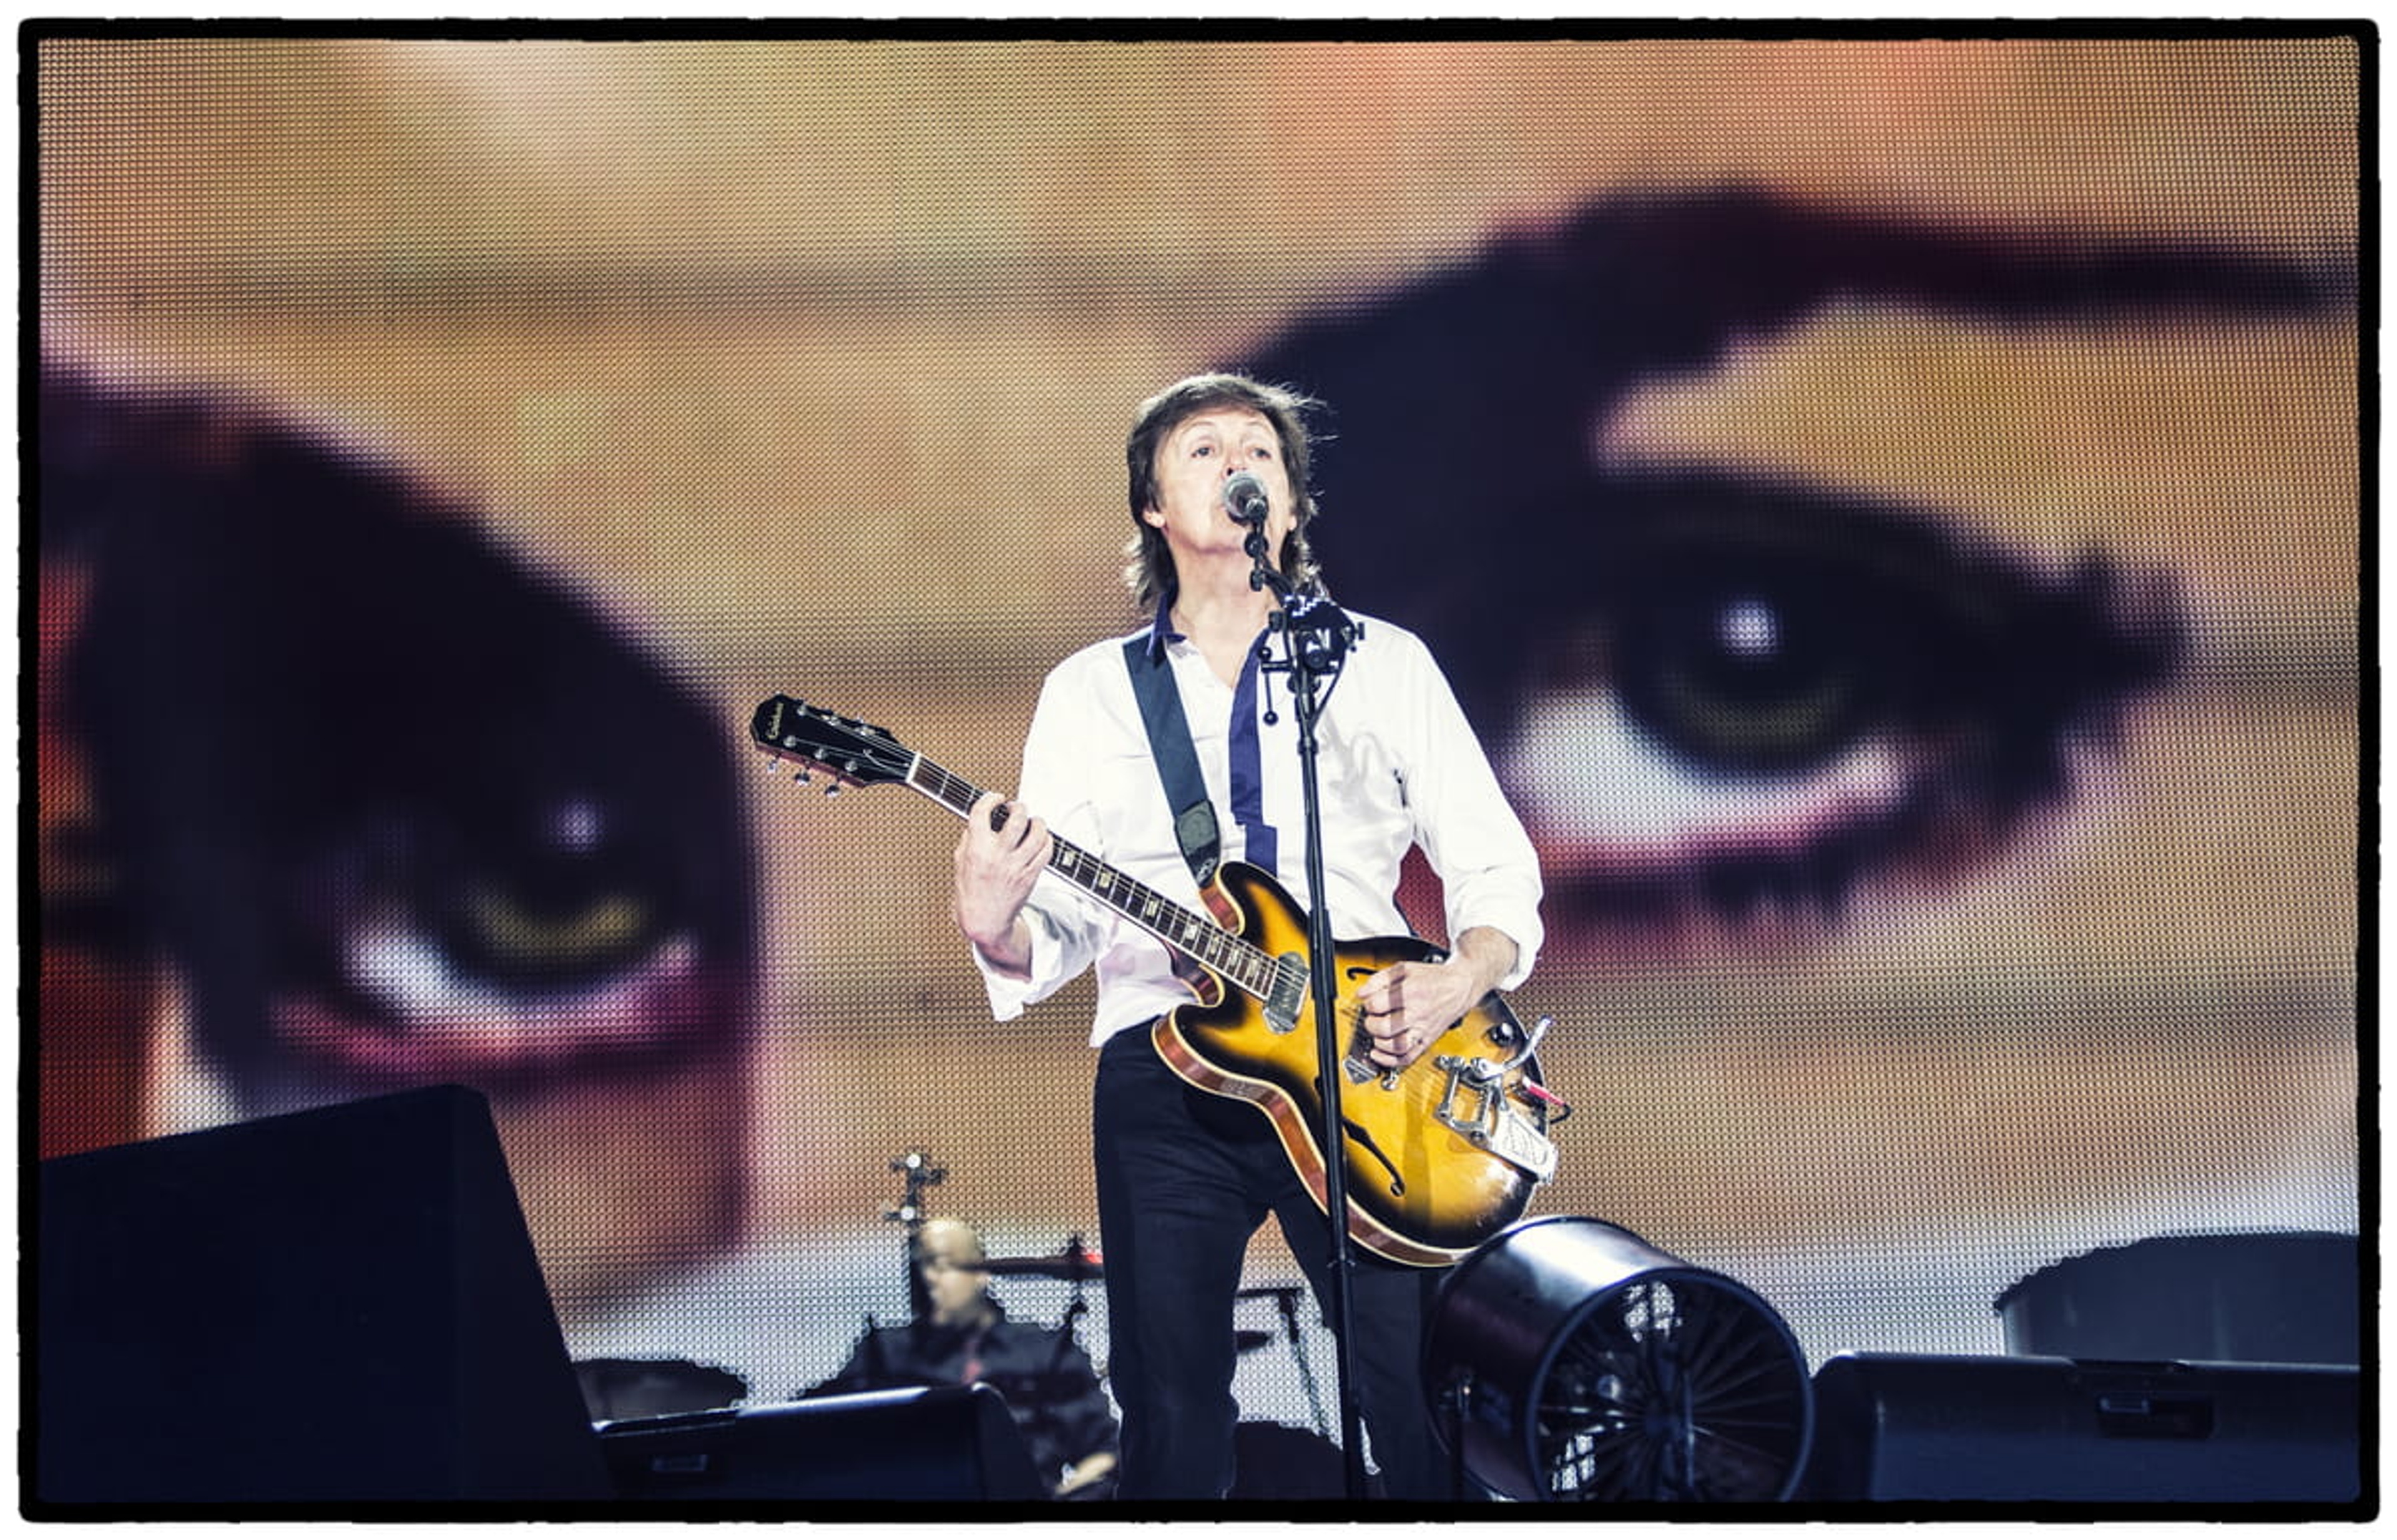 Paul on stage, National Stadium, Warsaw, 22nd June 2013